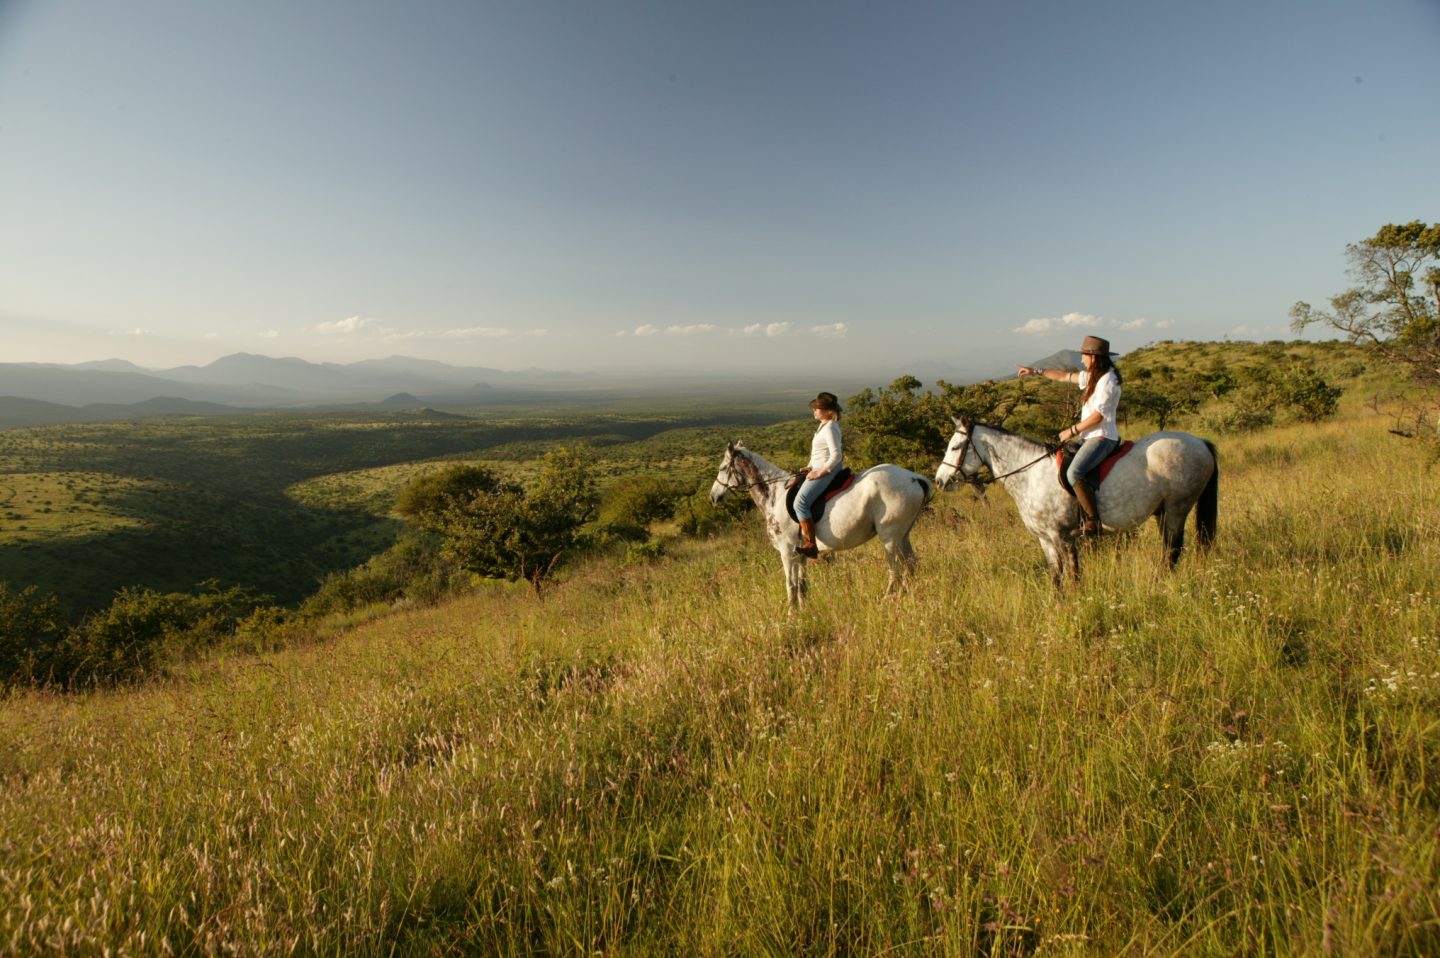 Activities: It's not all about 4x4's! There is a wealth of activities and experiences to be had at every turn including horse riding amongst the herds, walking safaris, visiting the neighbouring Ndare Ngare Forest and jumping into one of the waterfalls or taking to the skies for an aerial safari over the conservancy or around Mount Kenya. Credit: Lewa